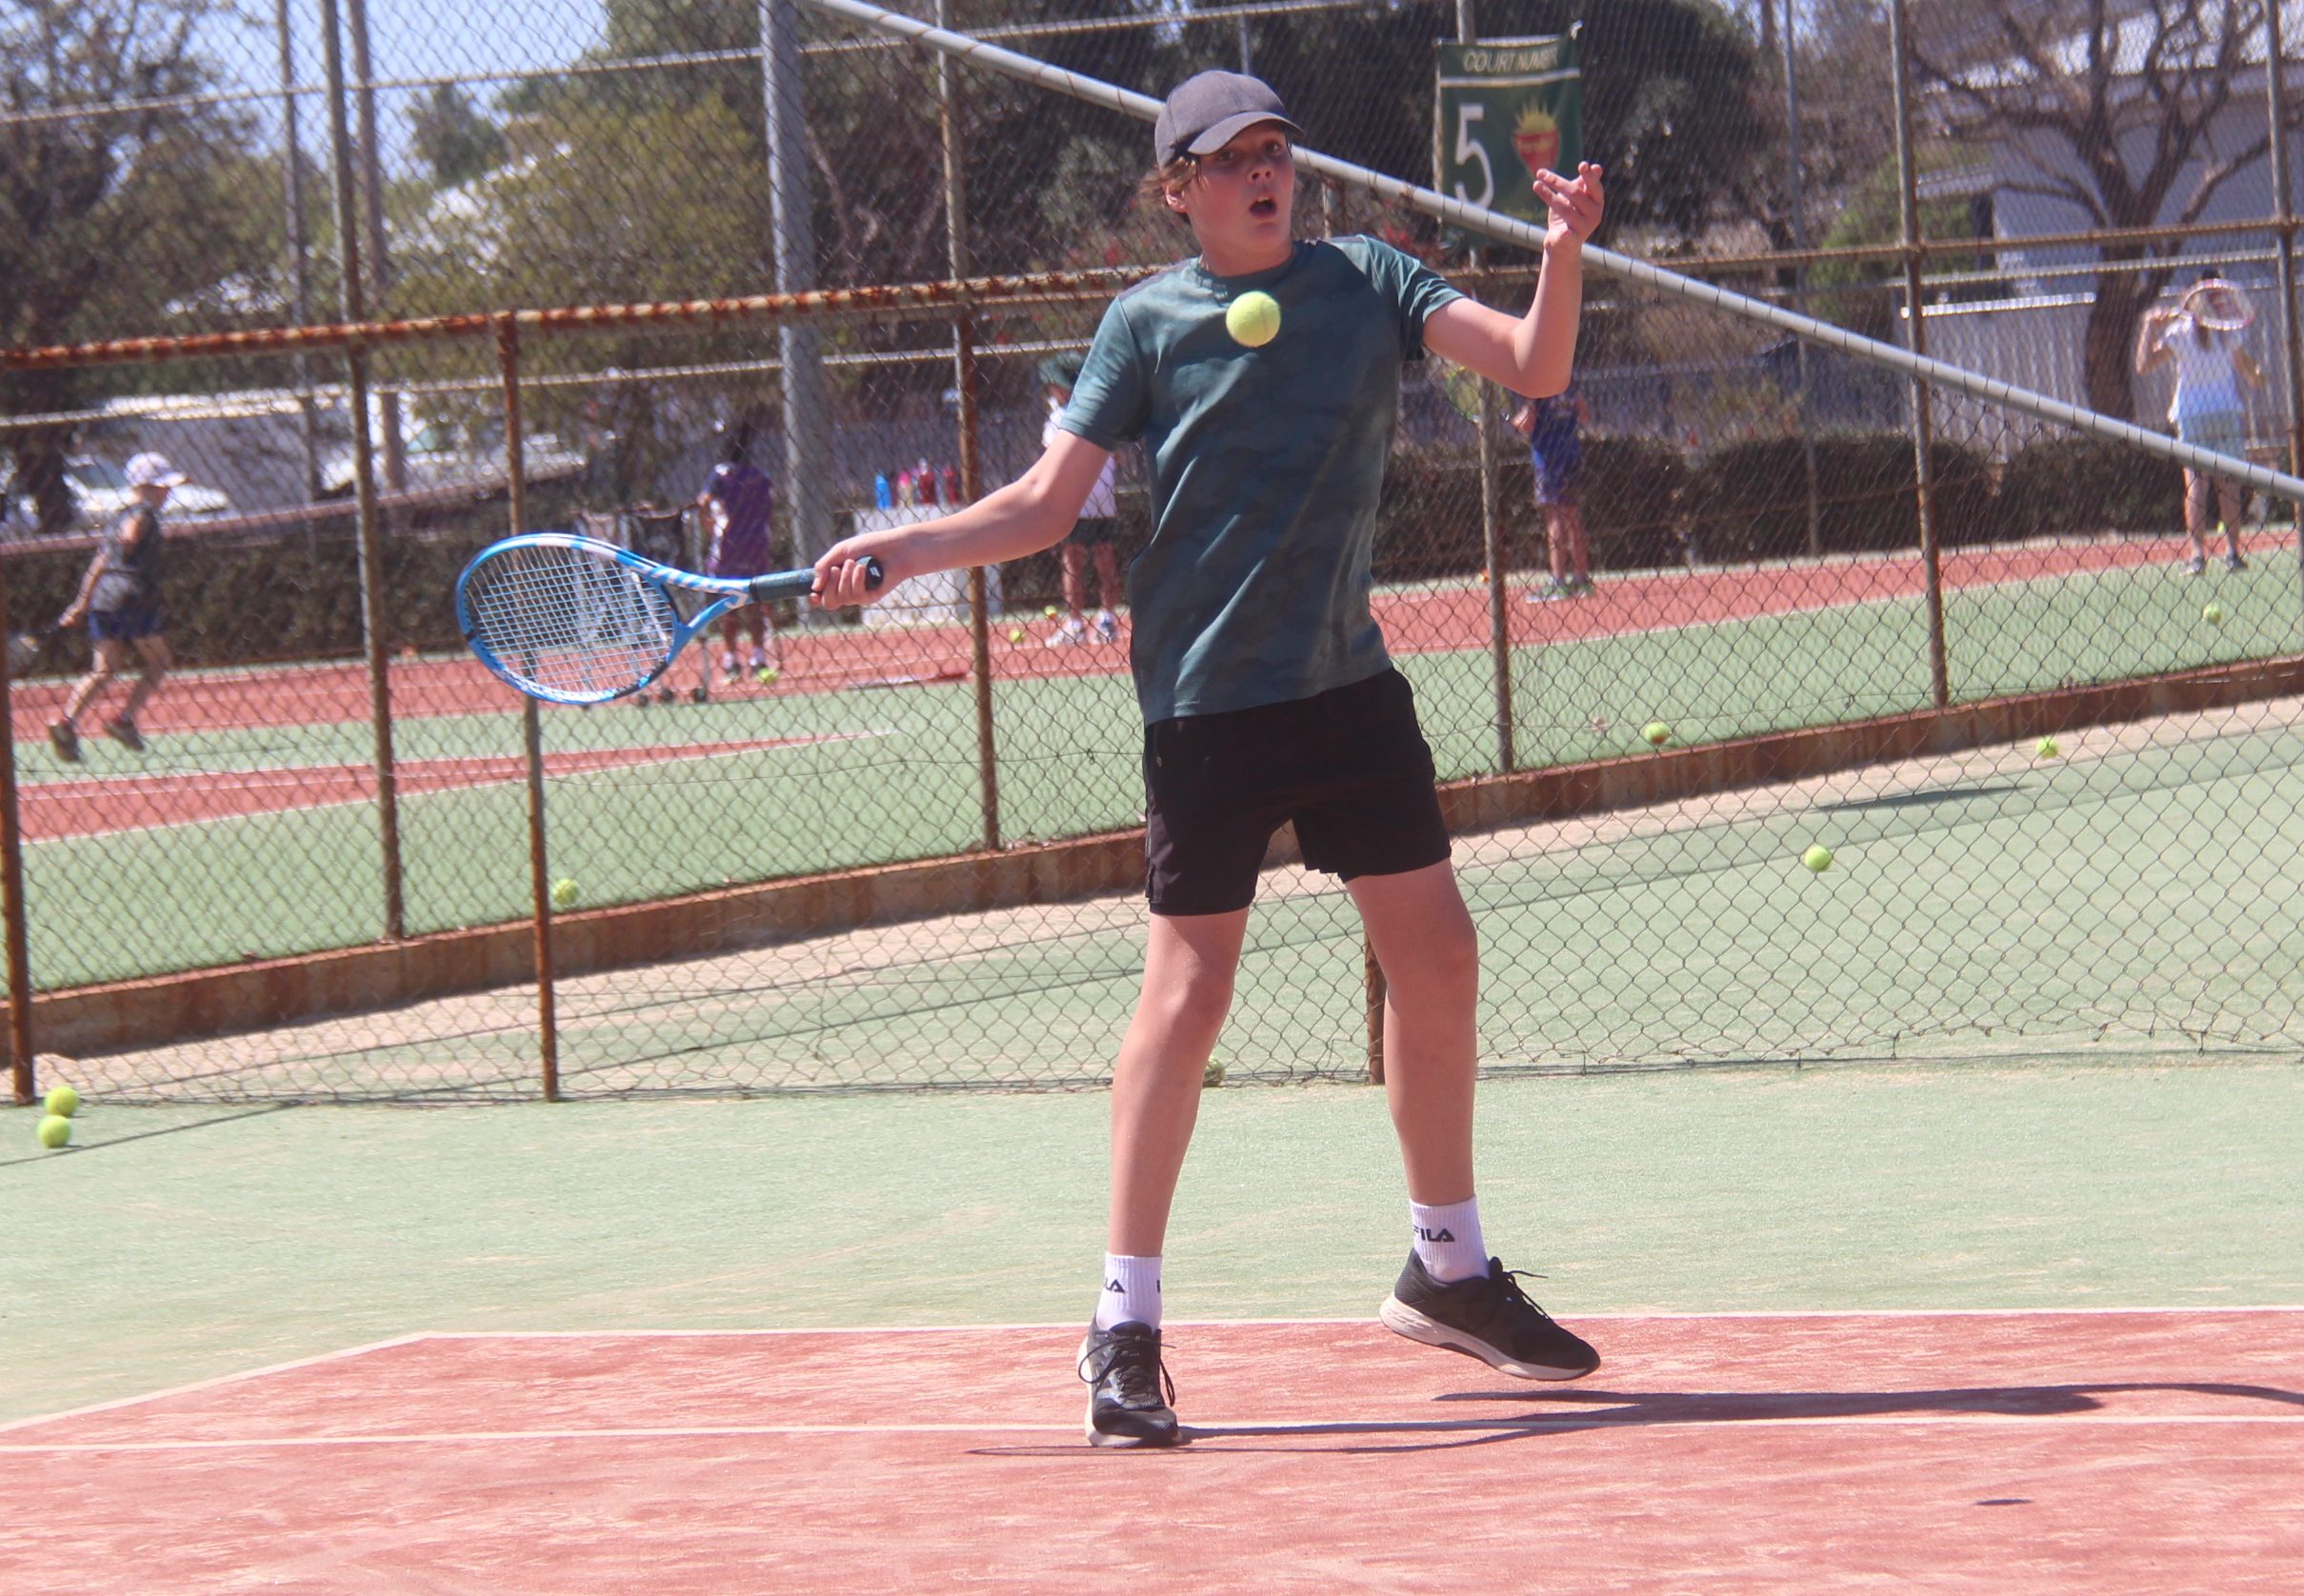 Callum Wales blasts a forehand over the net.